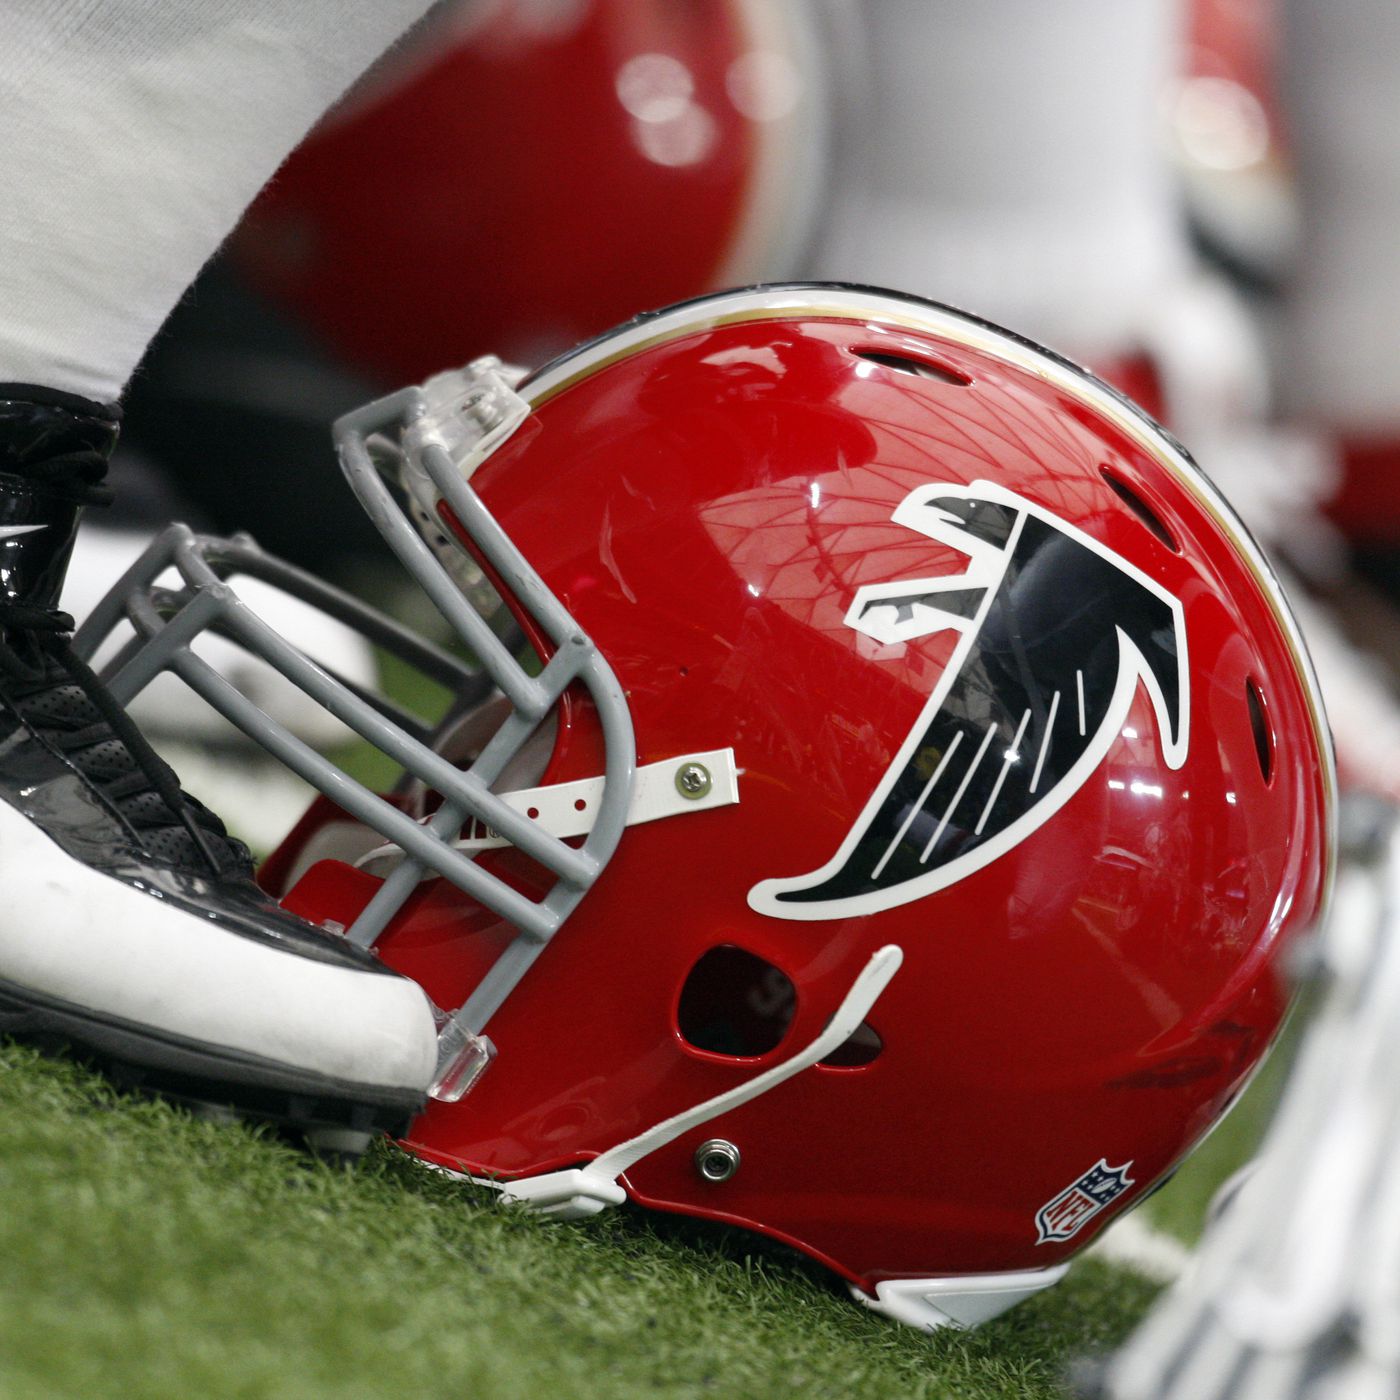 Atlanta Falcons to bring back red helmets in 2022